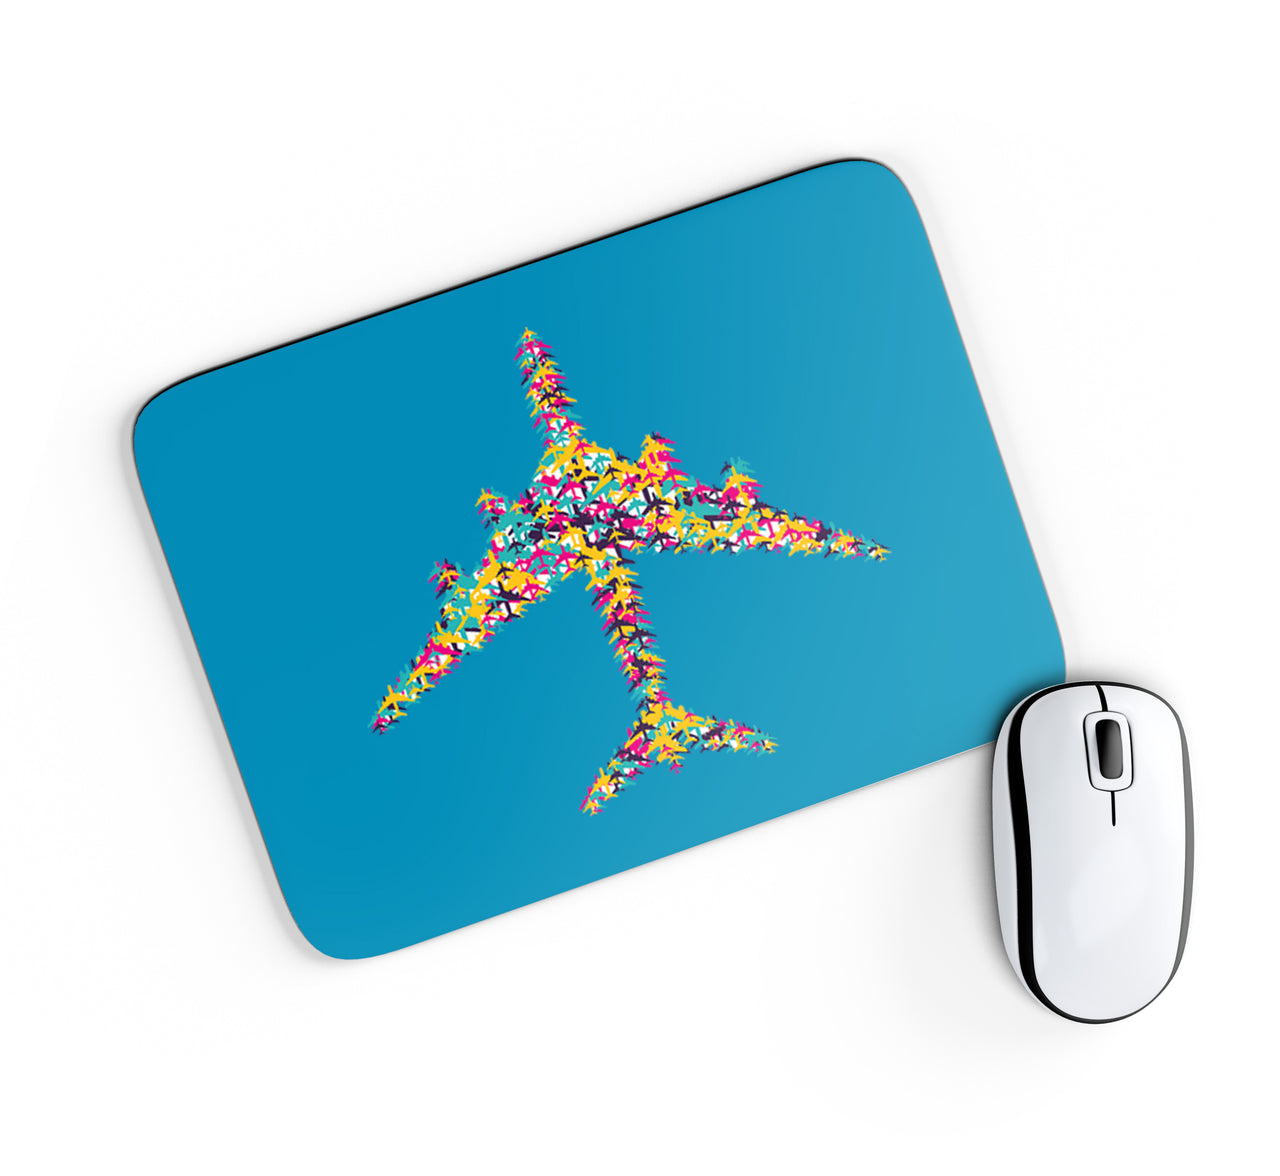 Colourful Airplane Designed Mouse Pads